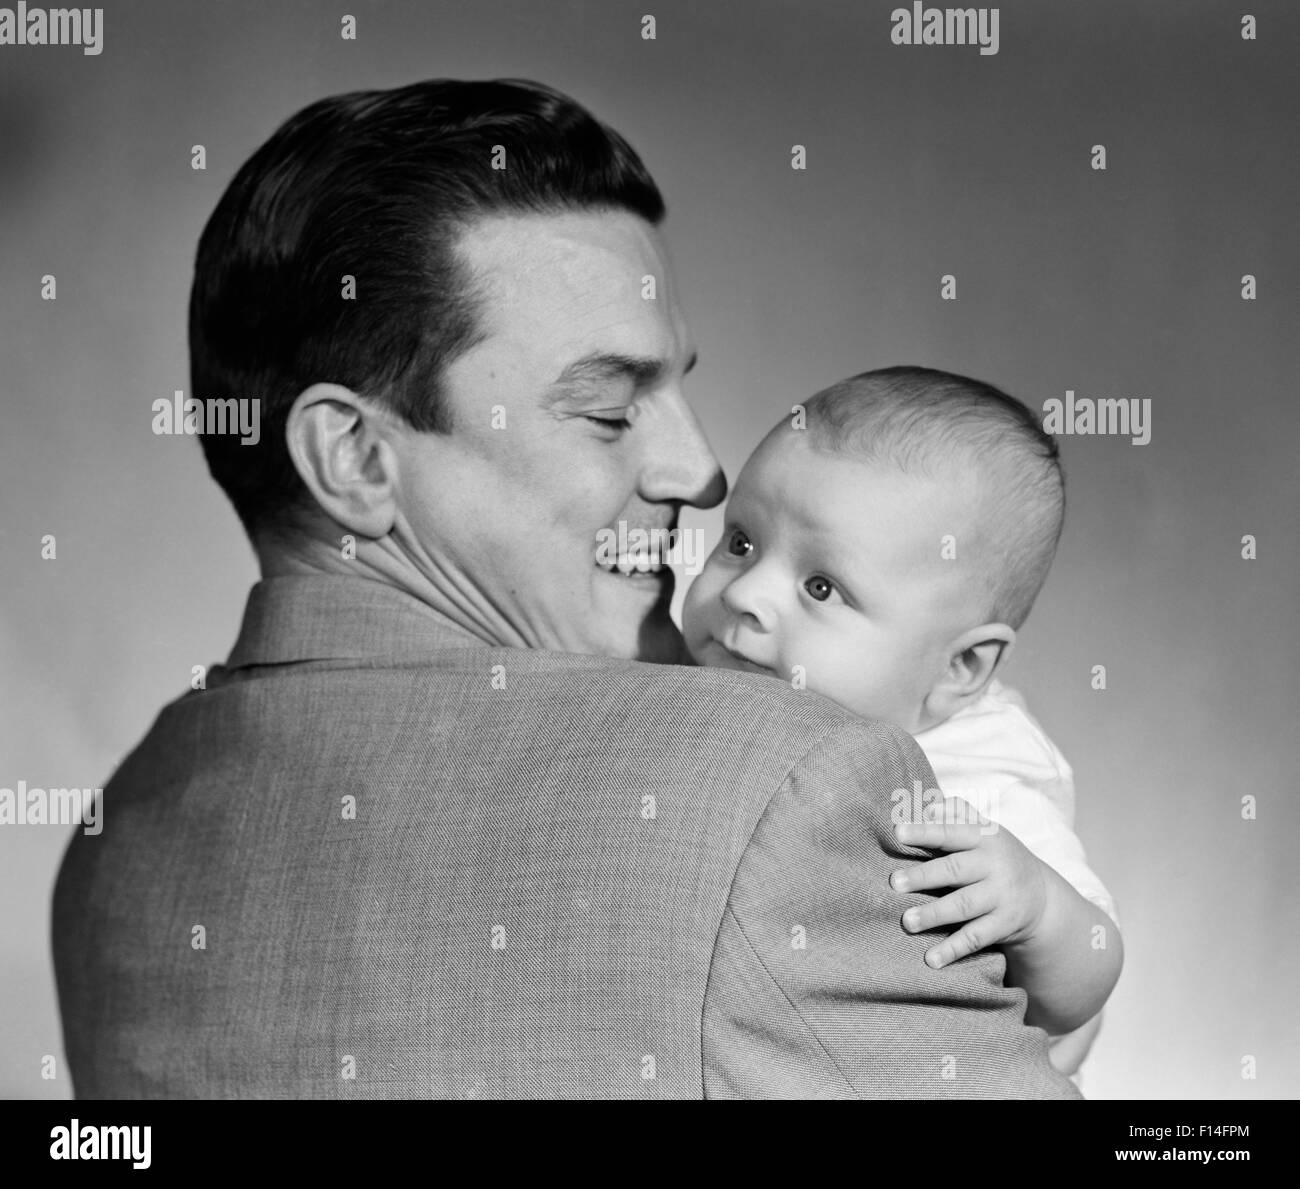 1950s PROUD SMILING MAN FATHER BACK TOWARD CAMERA HOLDING BABY SON FACE TO CAMERA Stock Photo